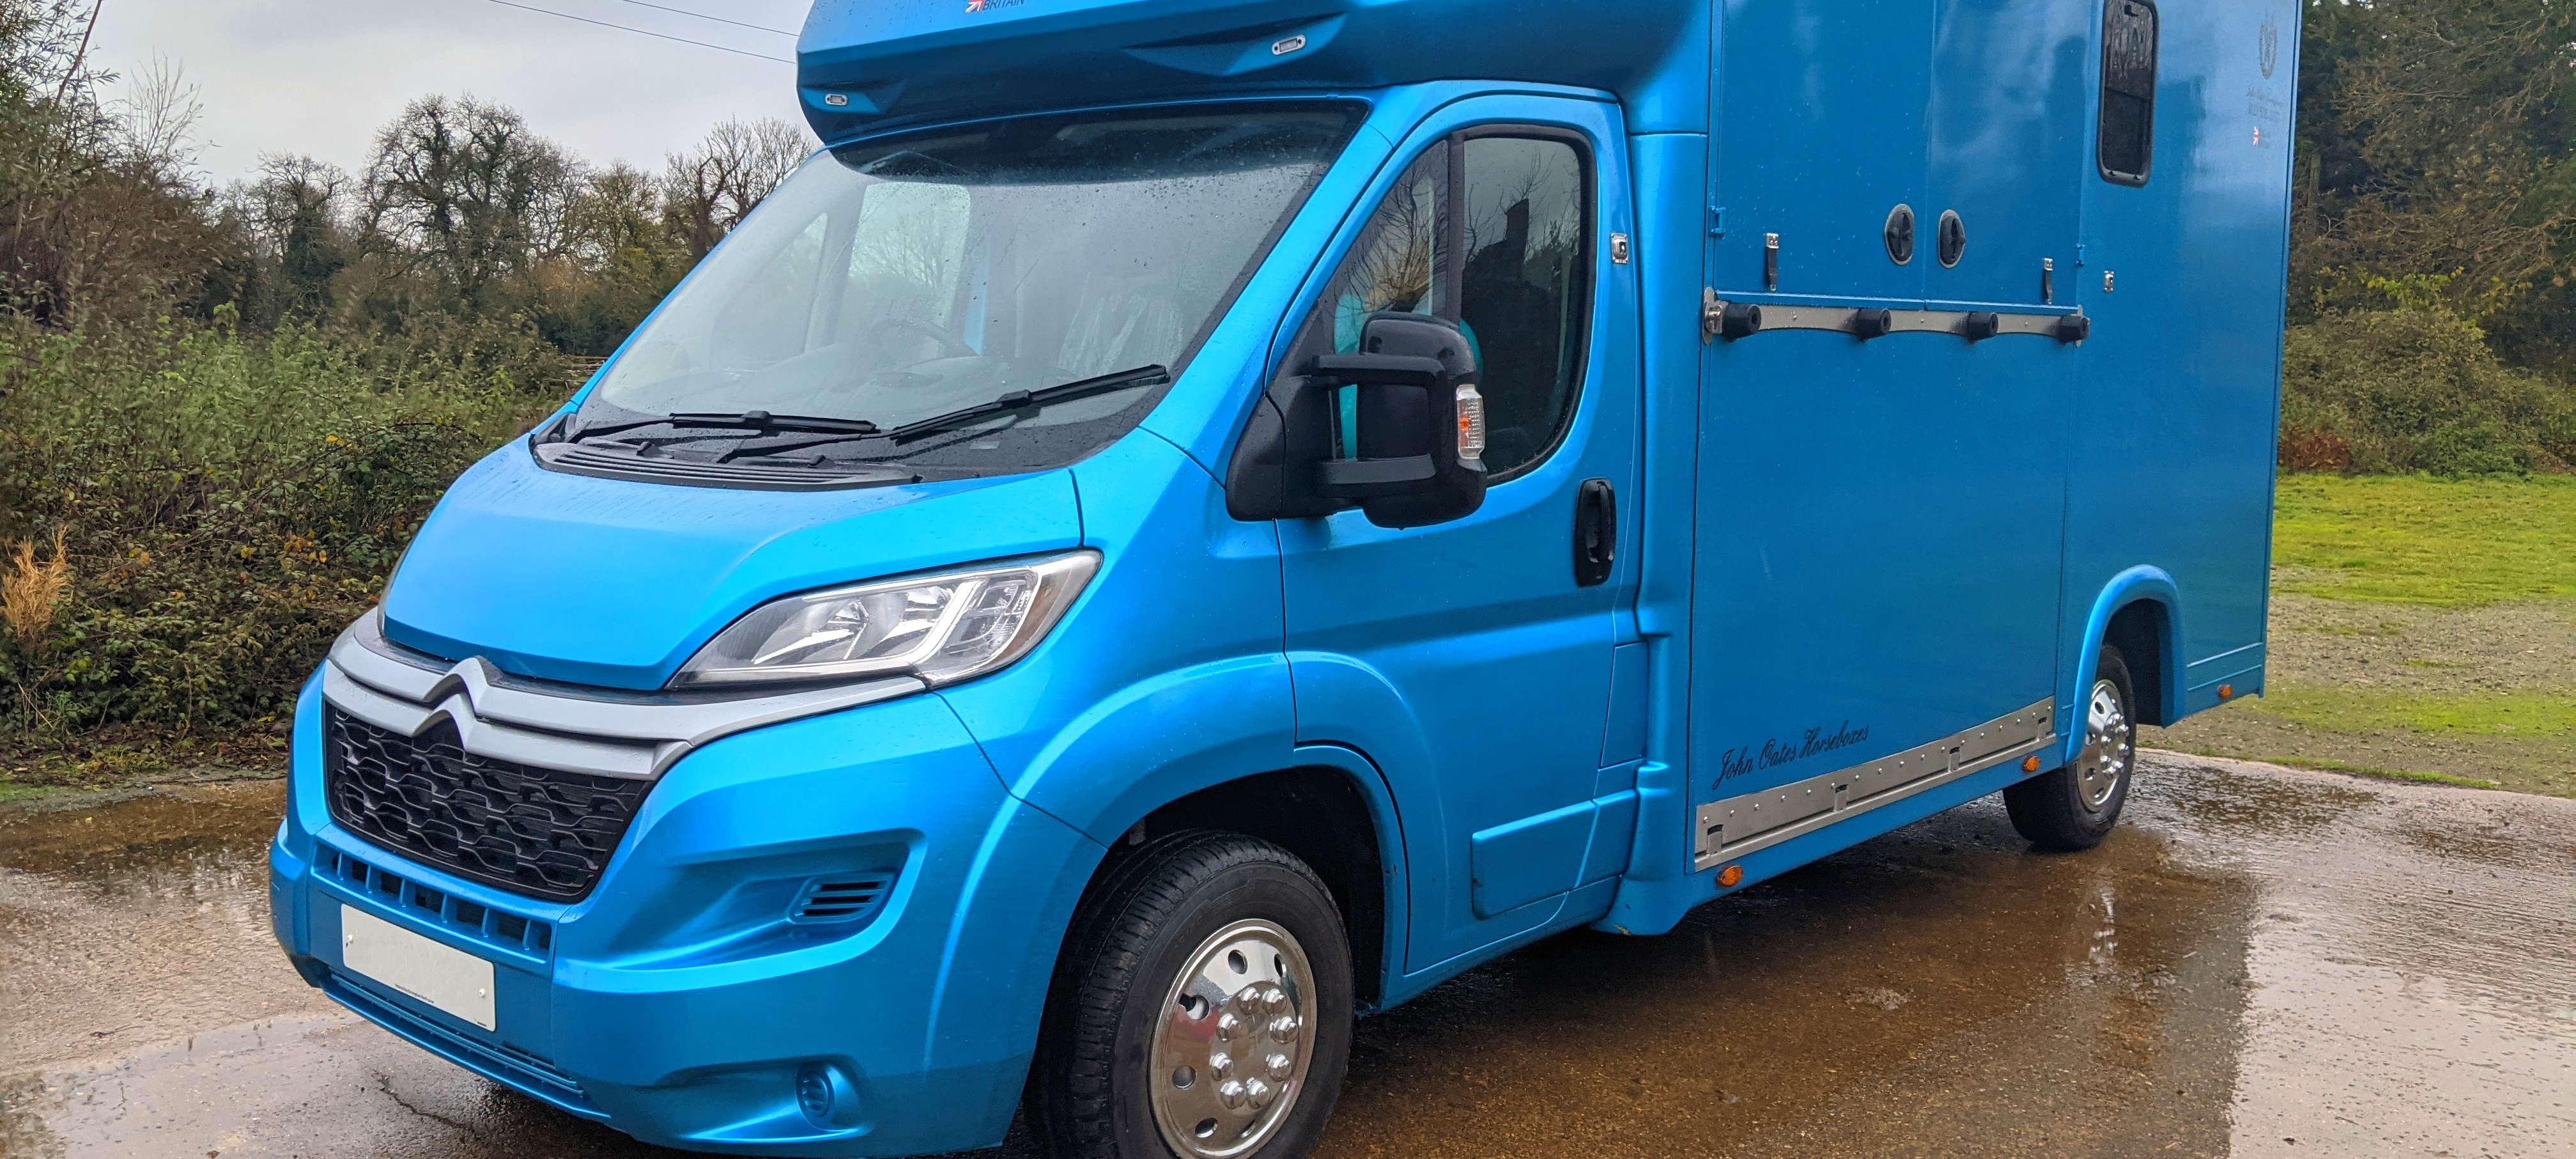 Horsebox Insurance  Get A Quote Today  Equesure